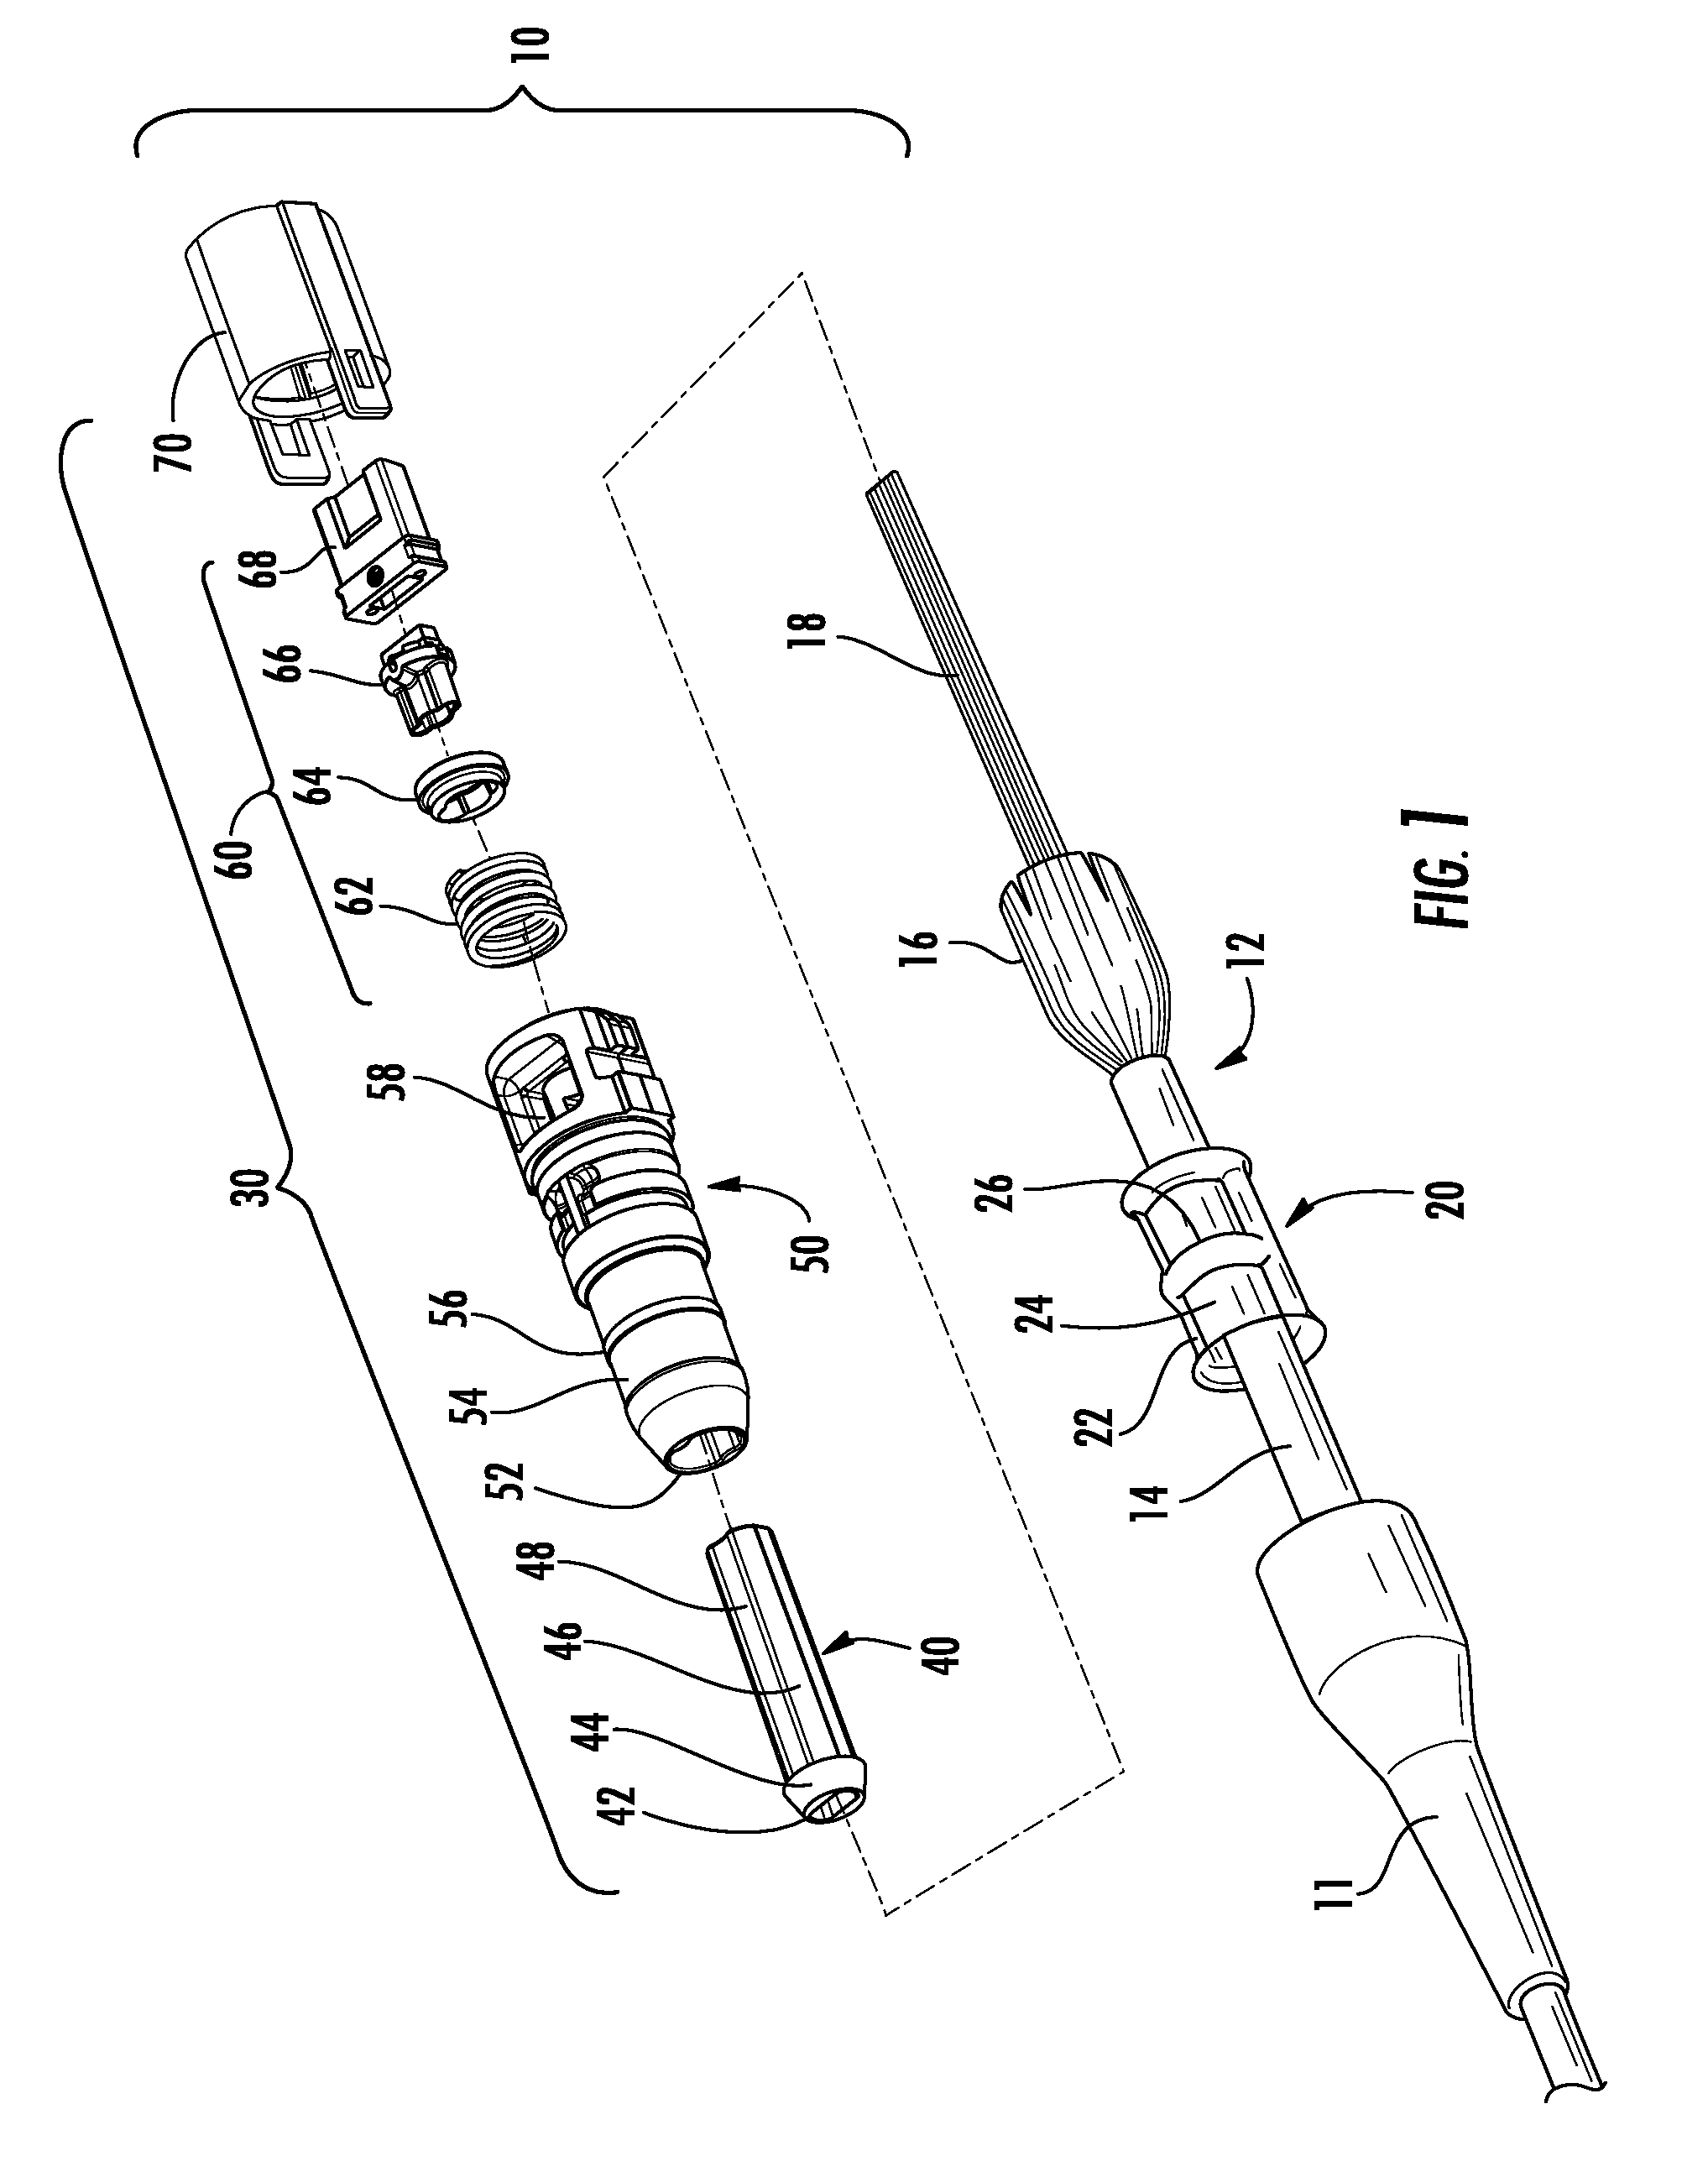 Fiber optic cable assemblies with mechanically interlocking crimp bands and methods of making the assemblies